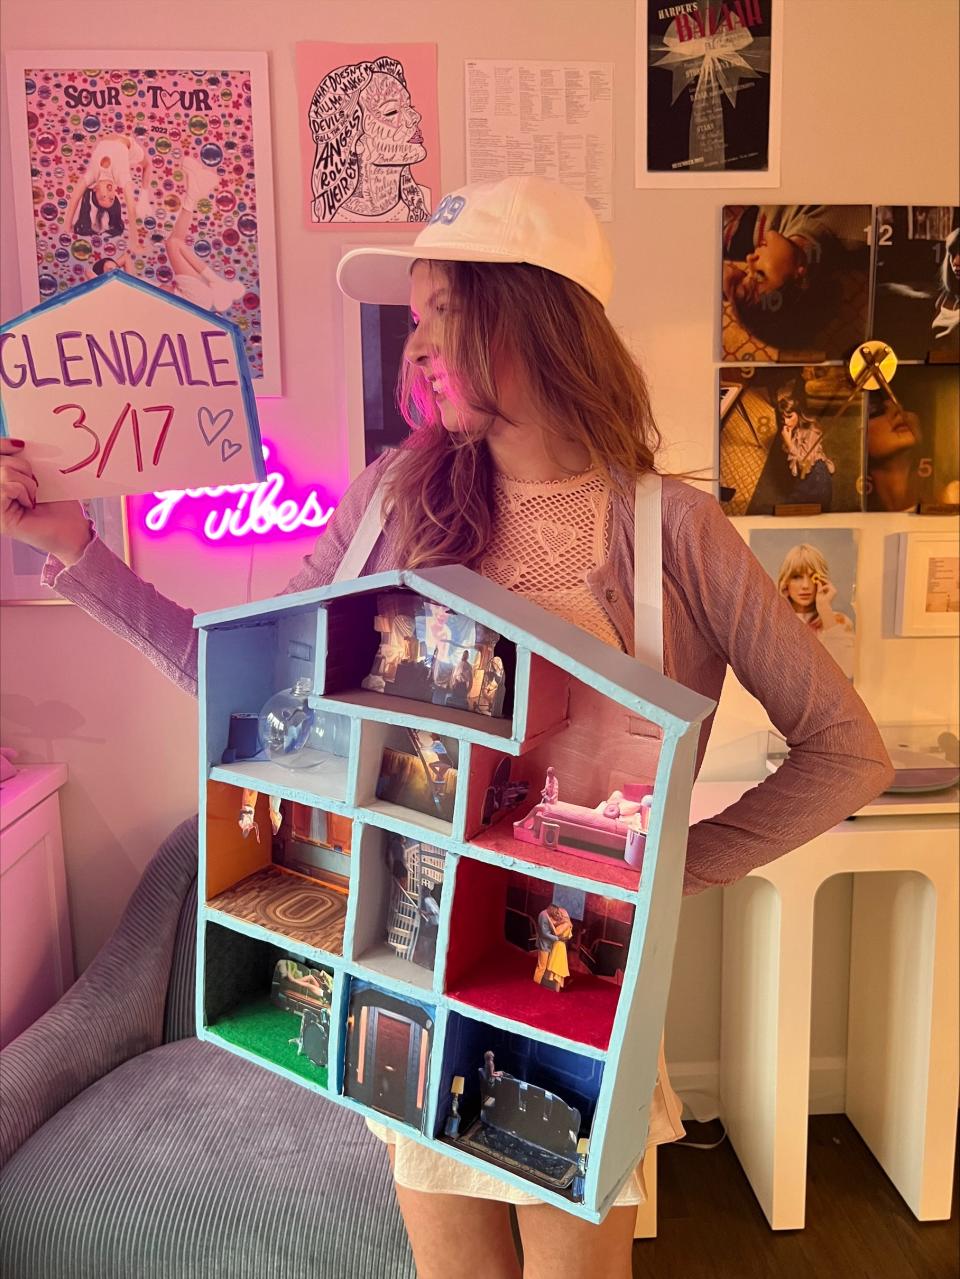 Madison, aka @bettysporchlght, made the three-story house in the “Lover” music video that depicts each of Taylor Swift's albums as different rooms for the first Eras Tour show on March 17, 2023, at State Farm Stadium in Glendale, Arizona.